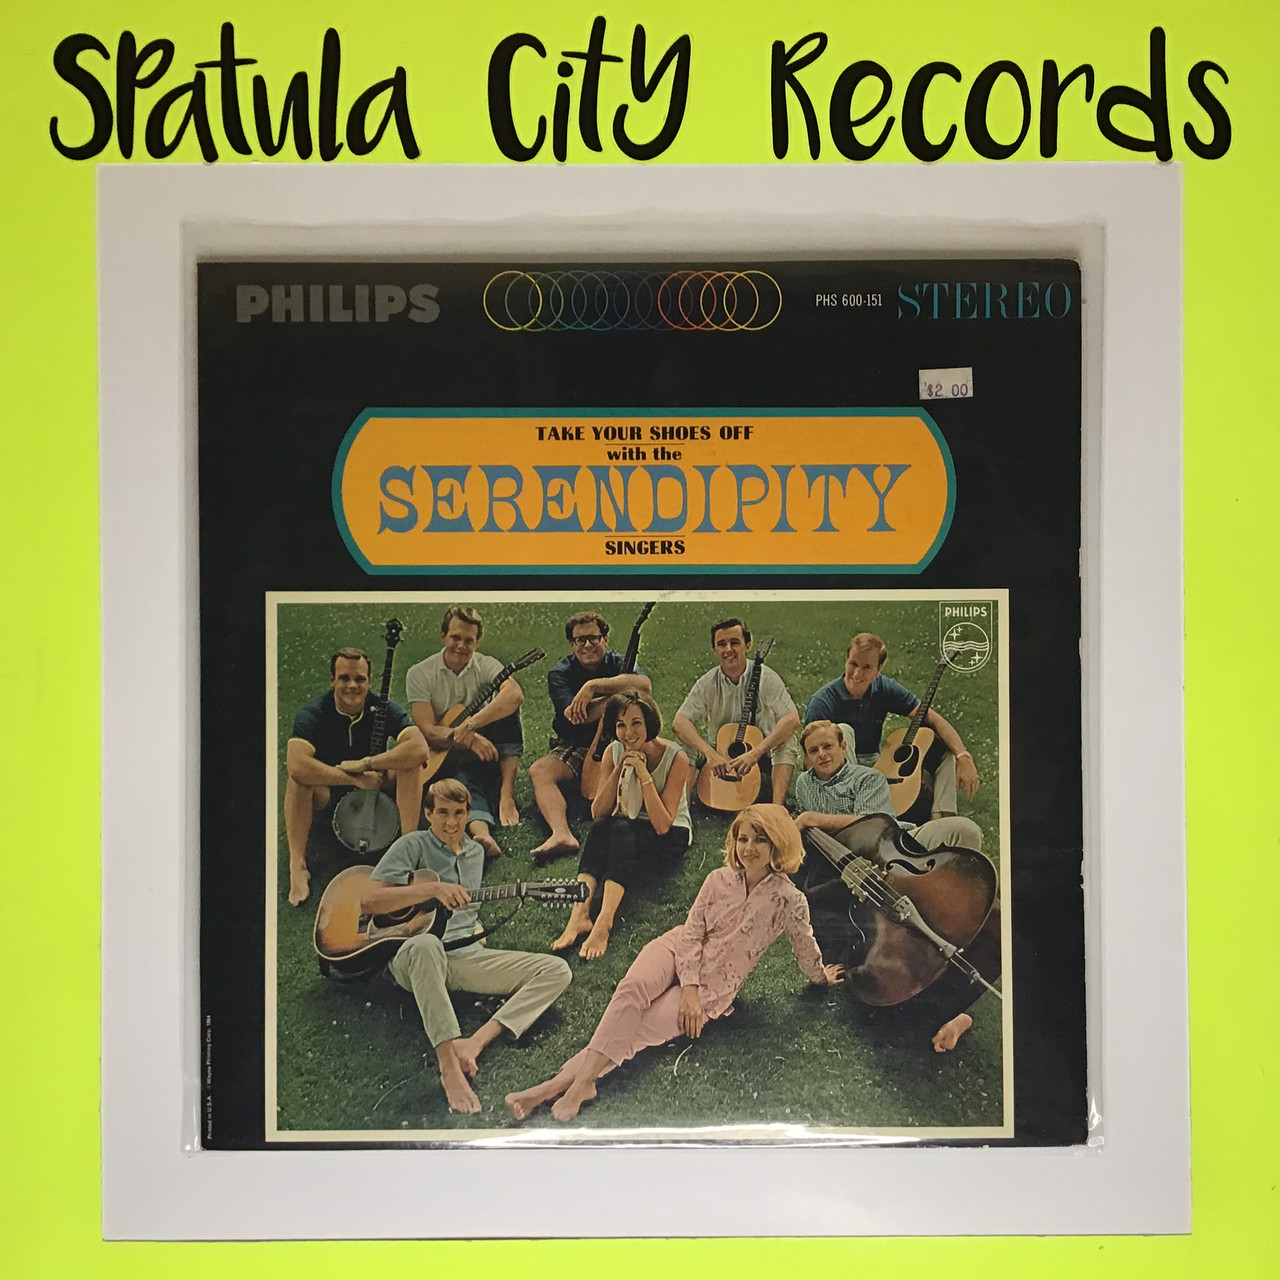 Serendipity Singers – Take Your Shoes Off With The Serendipity Singers - vinyl record LP